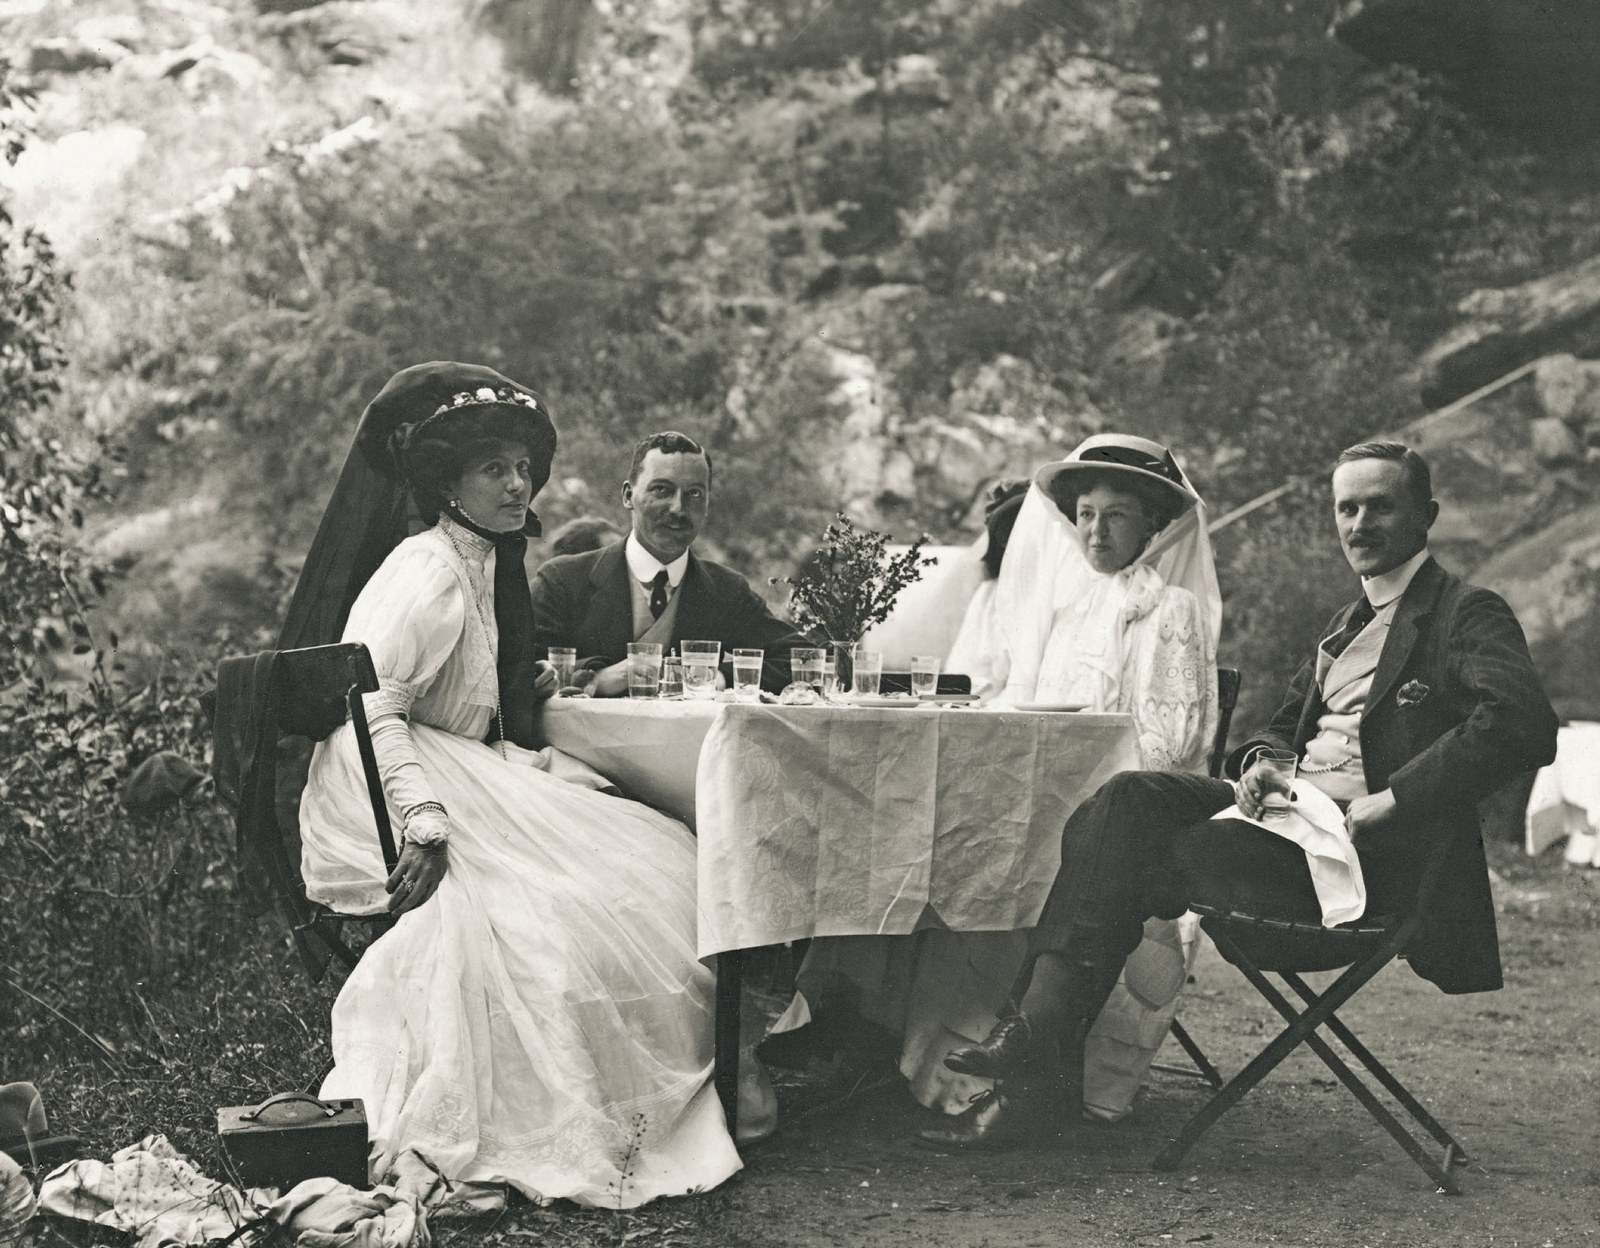 Four people sit outside gathered around a small table with white table cloth, surrounded by trees.